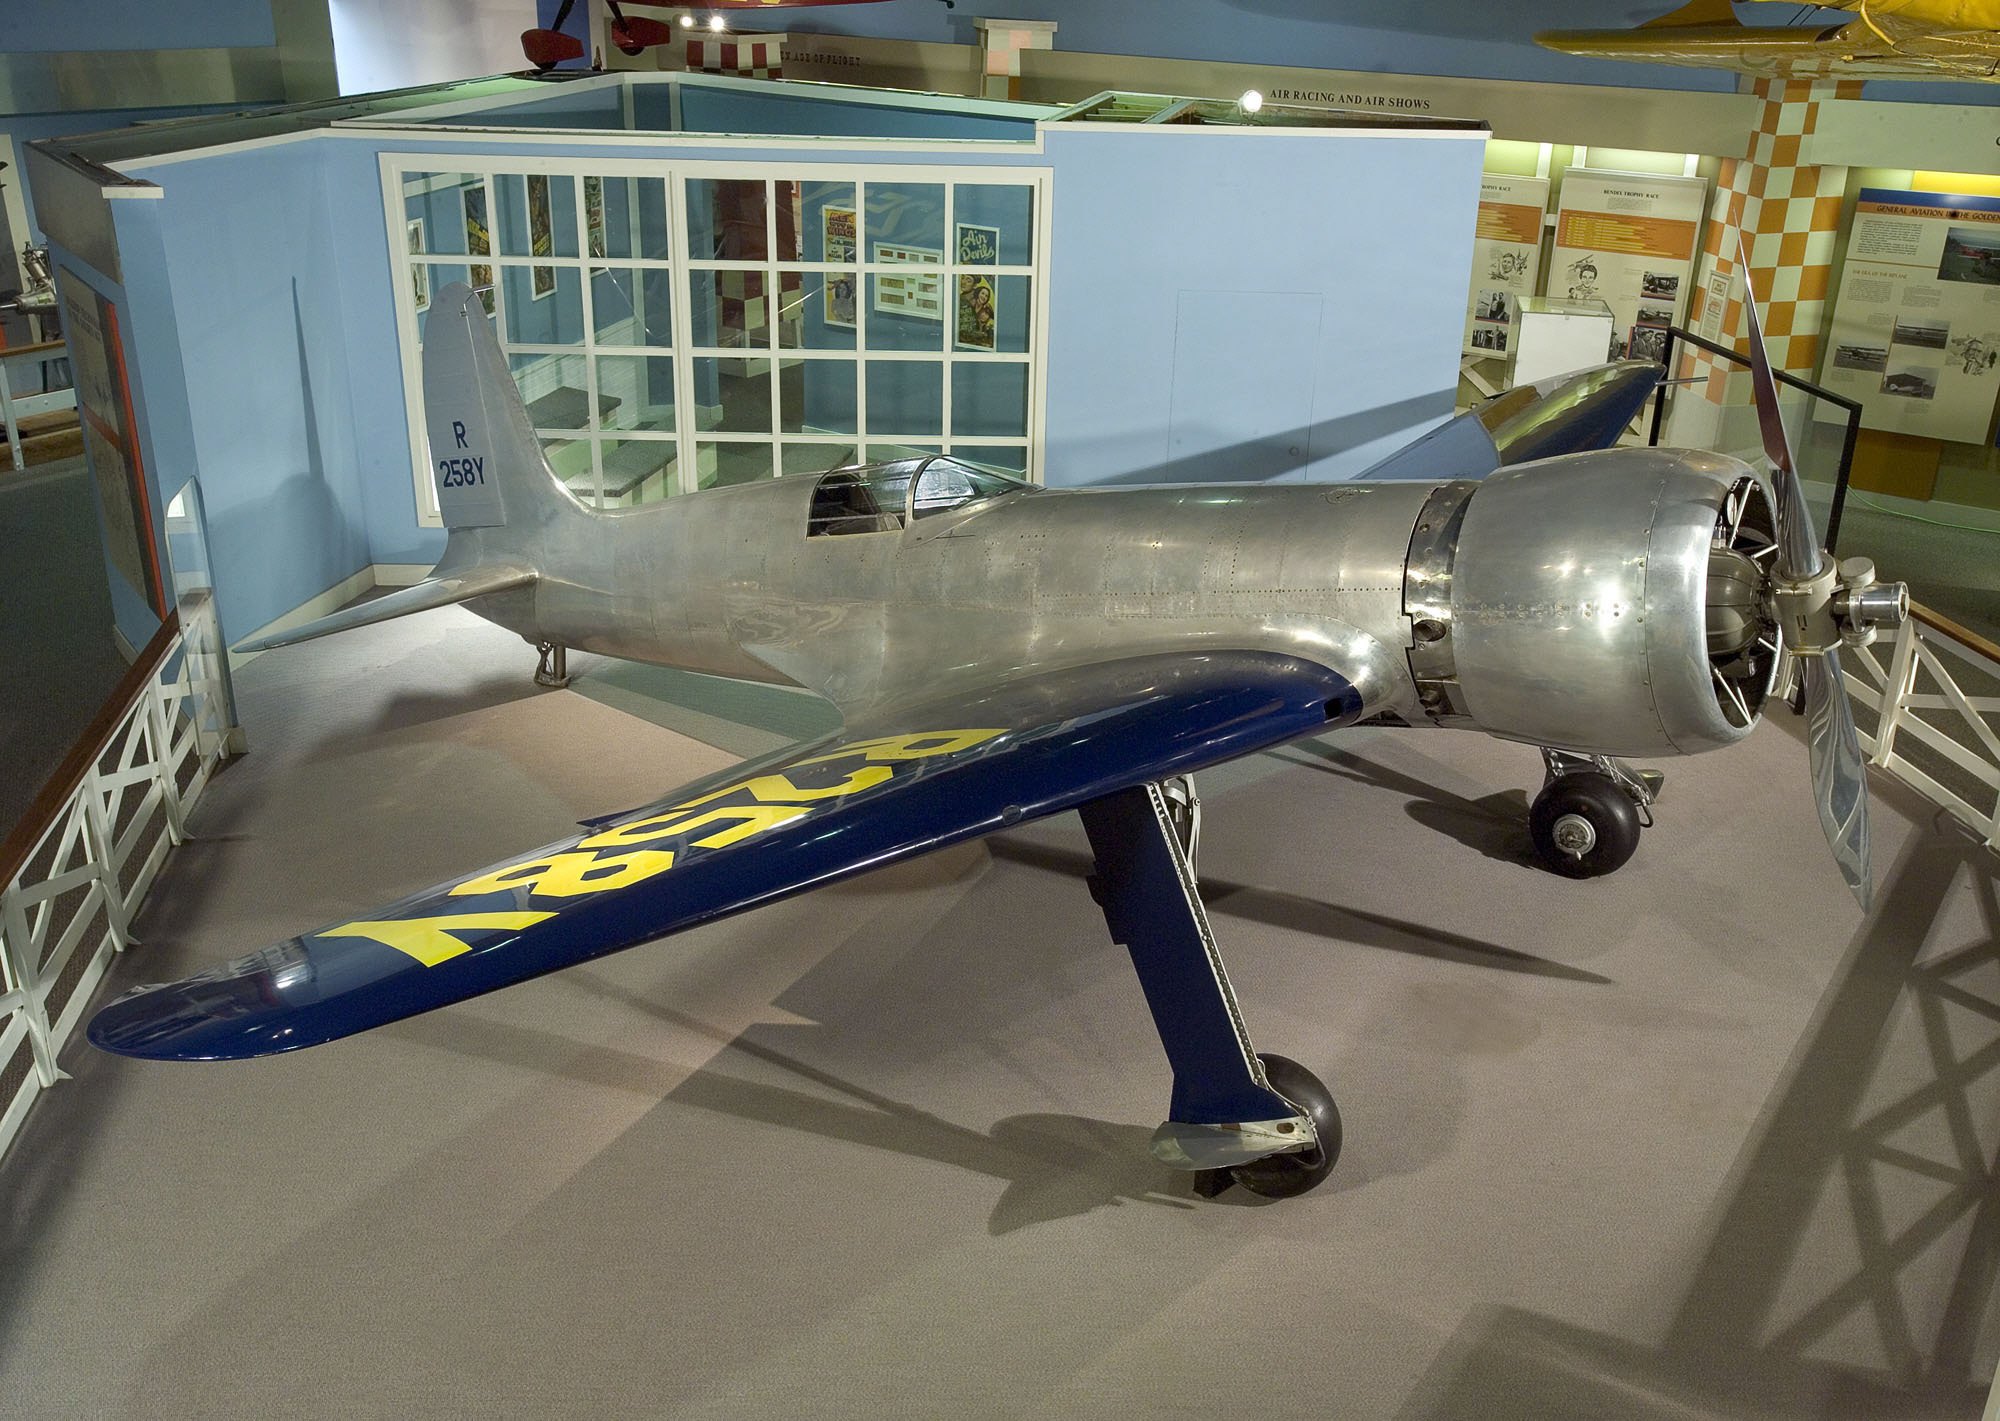 The Hughes H-1 Racer, NR258Y, at the National Air and Space Museum. (NASM)